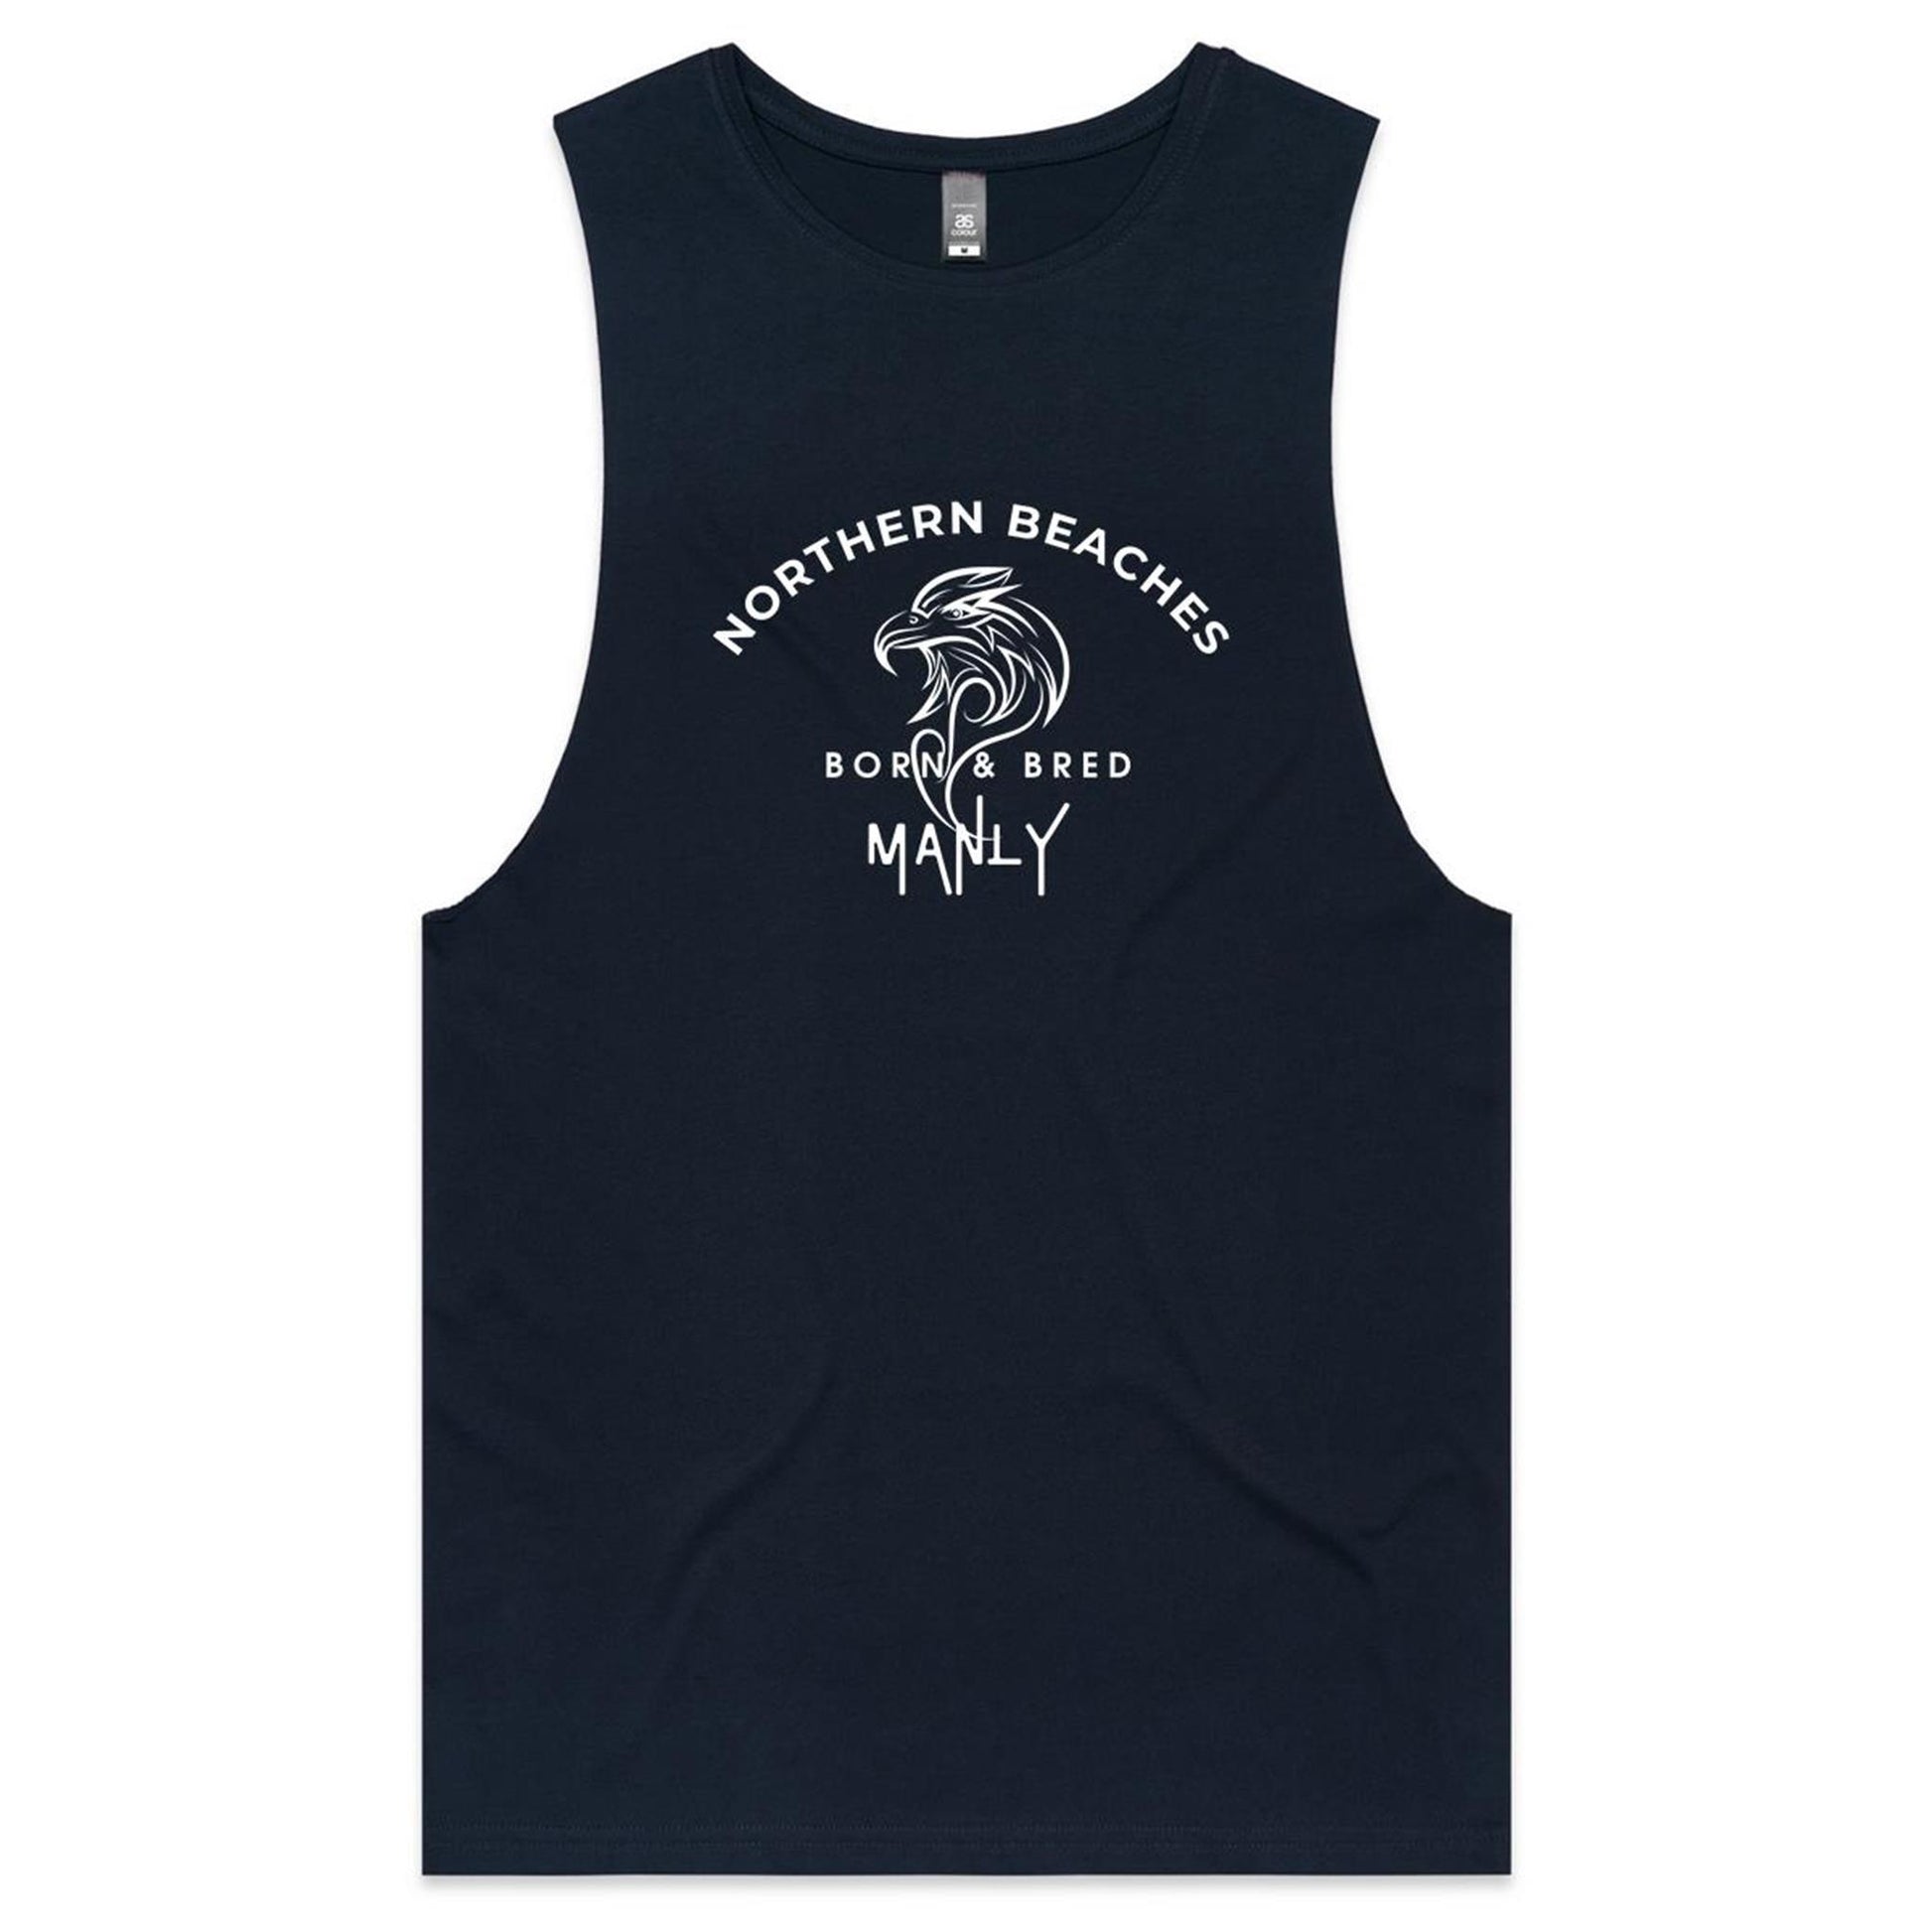 Classic cotton Tank Northern Beaches logo design - Lost Manly Shop